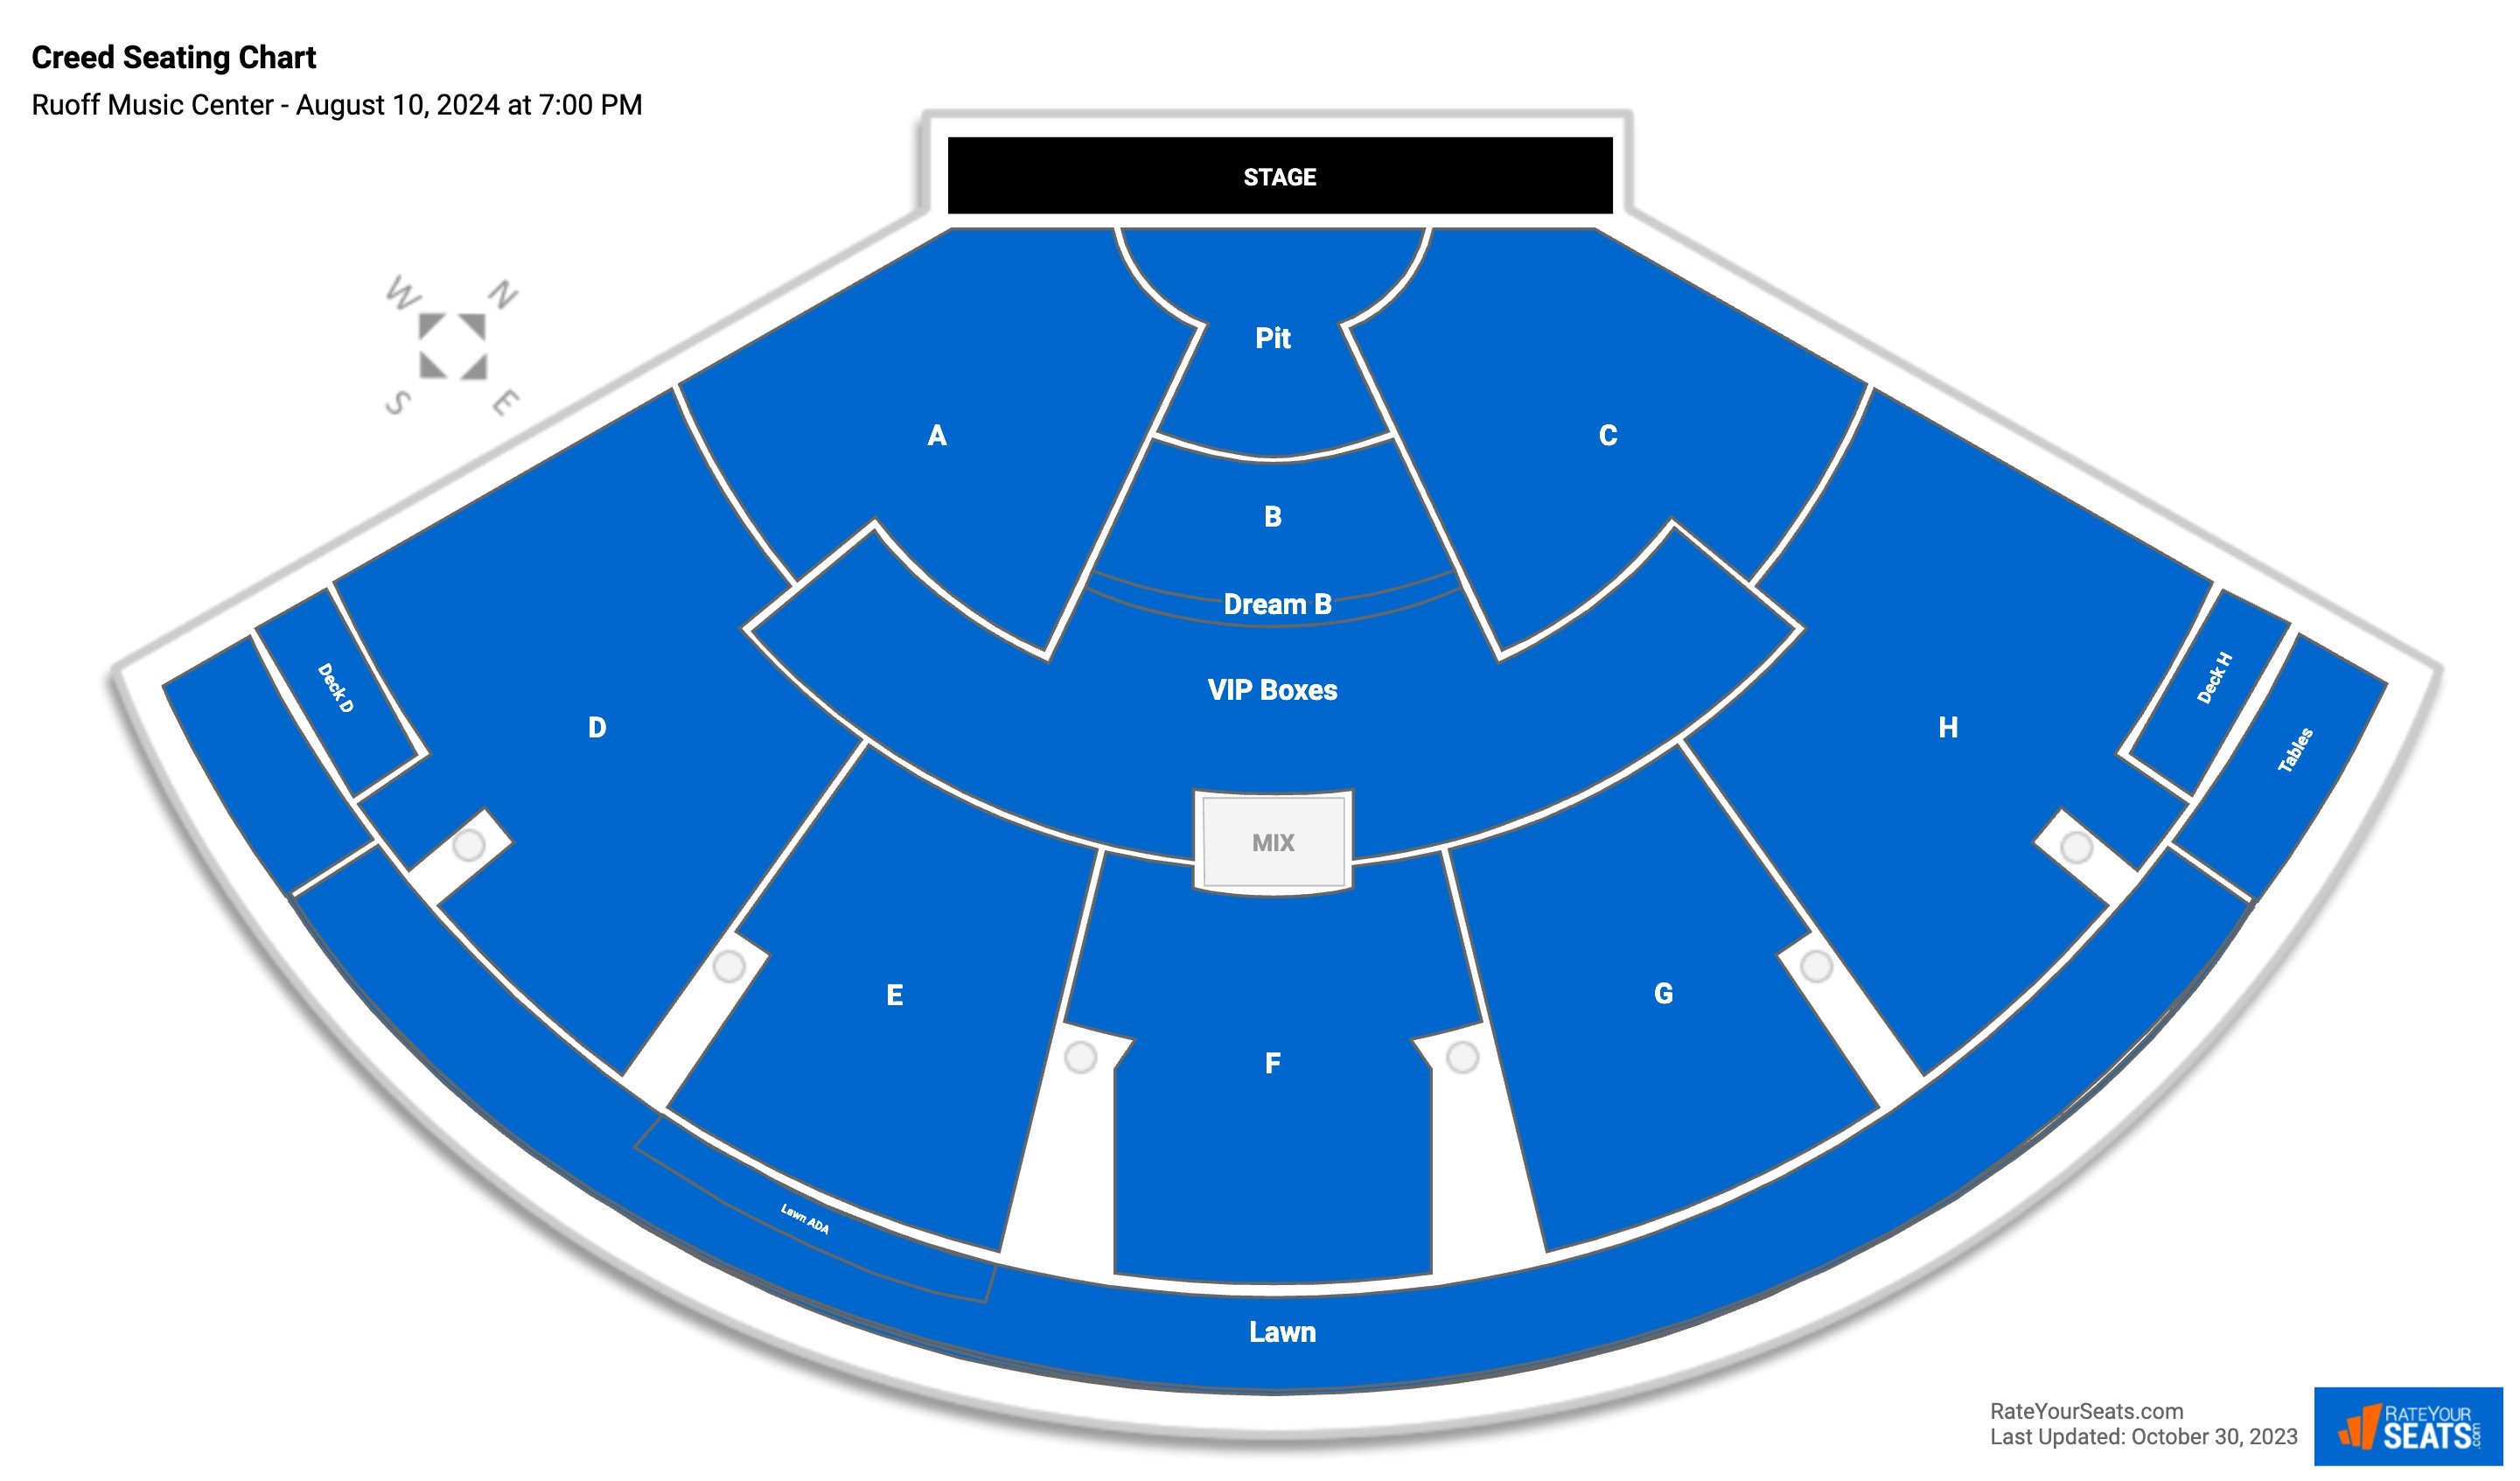 Ruoff Music Center Seating Chart Rateyourseats Com